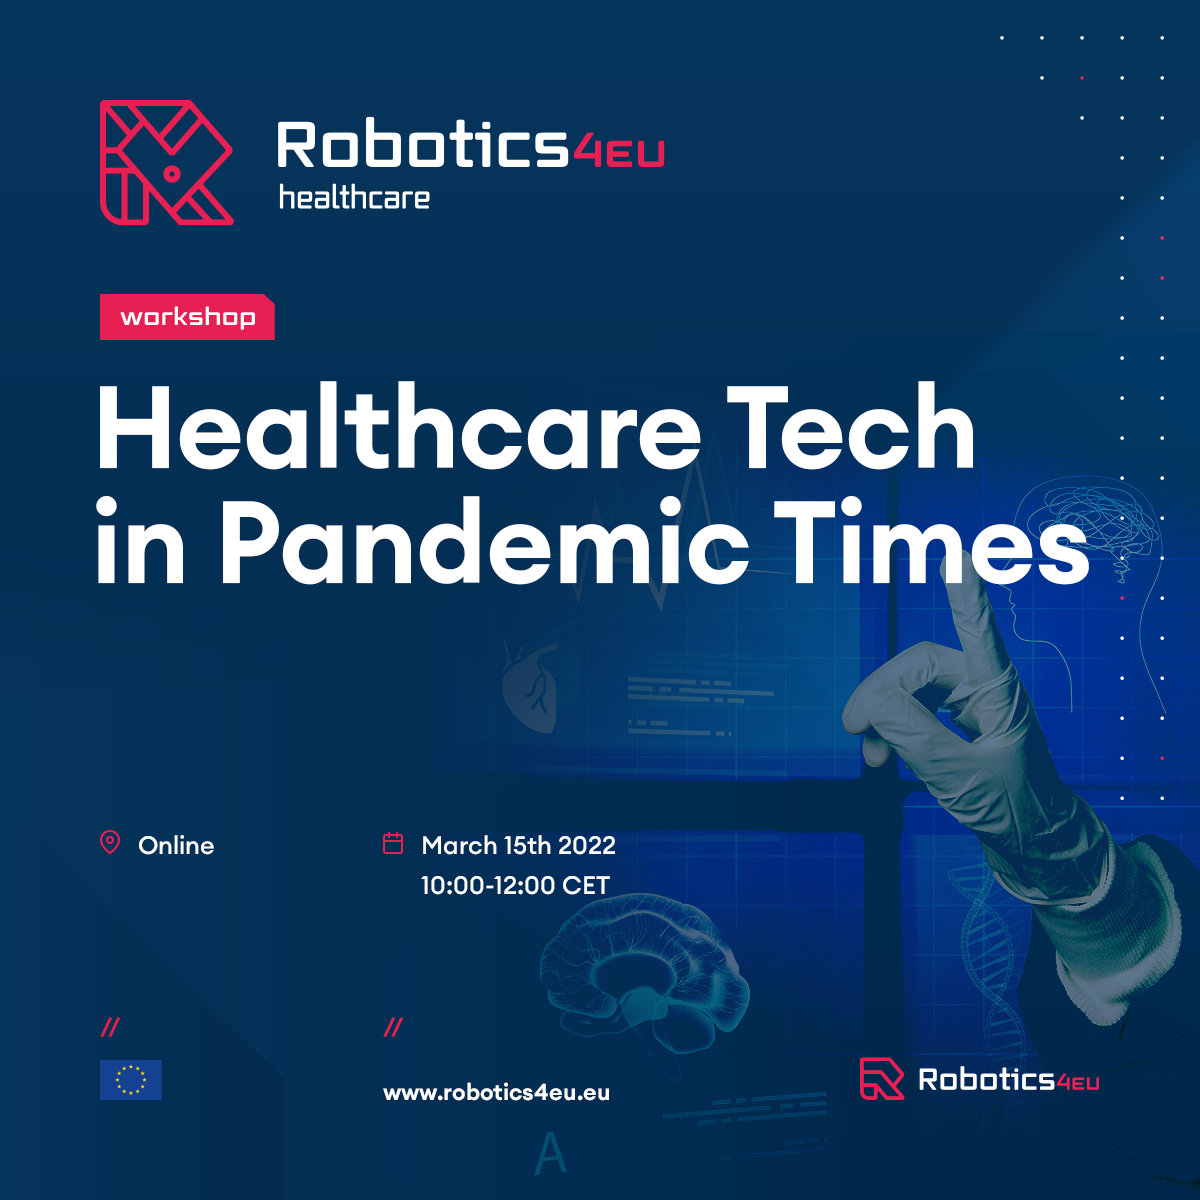 Healthcare Tech in Pandemic Times